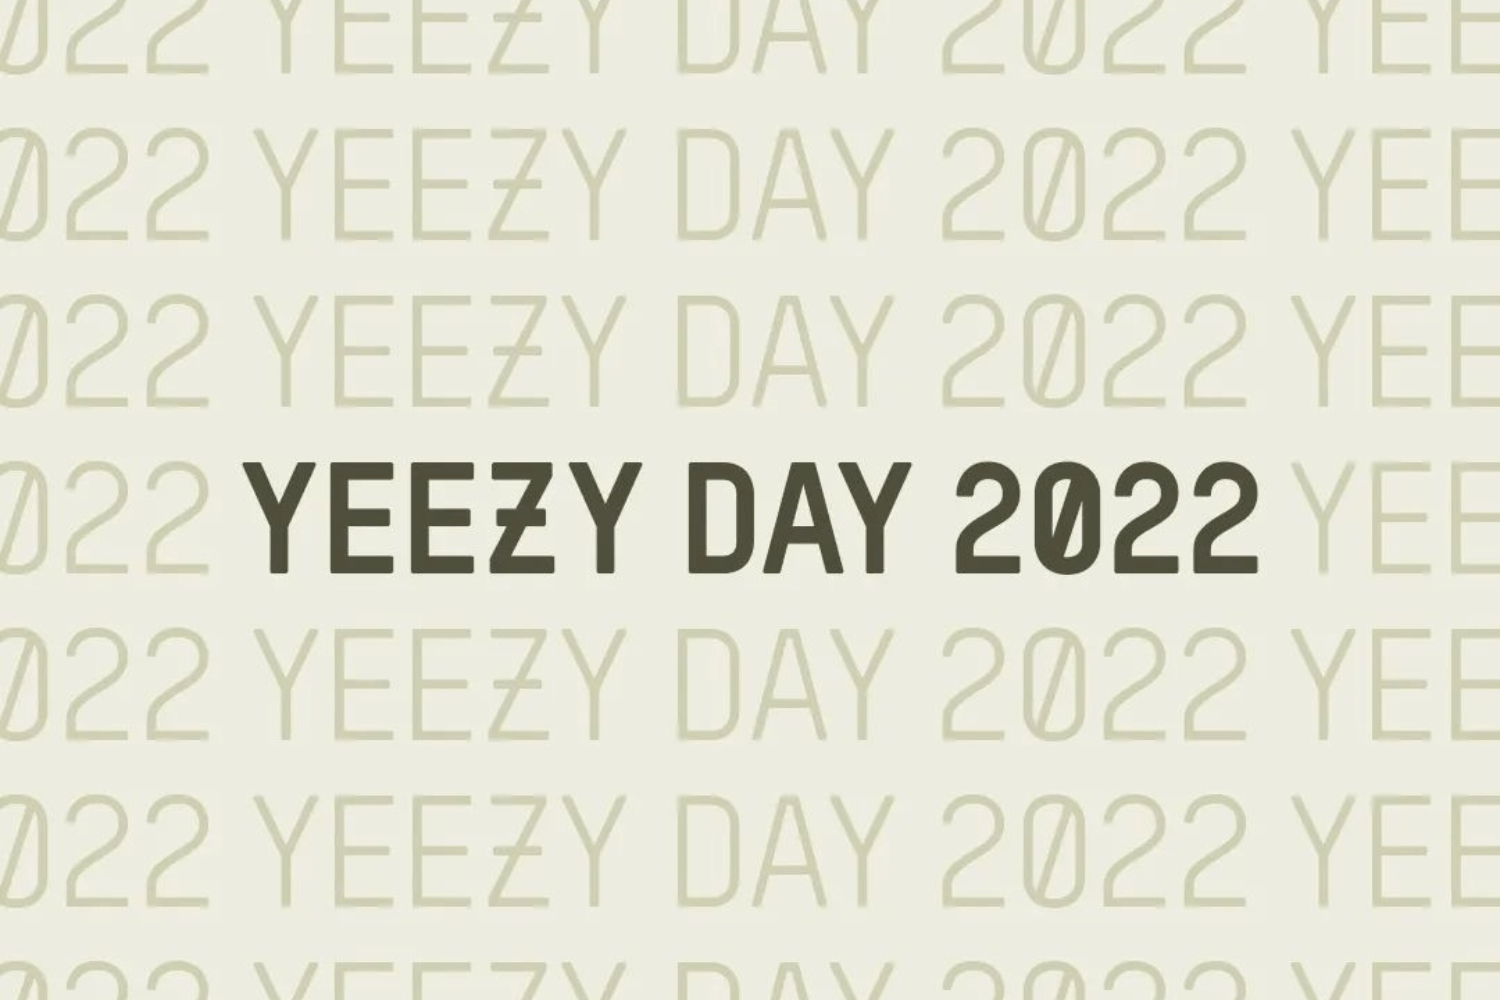 Everything we know about Yeezy Day so far